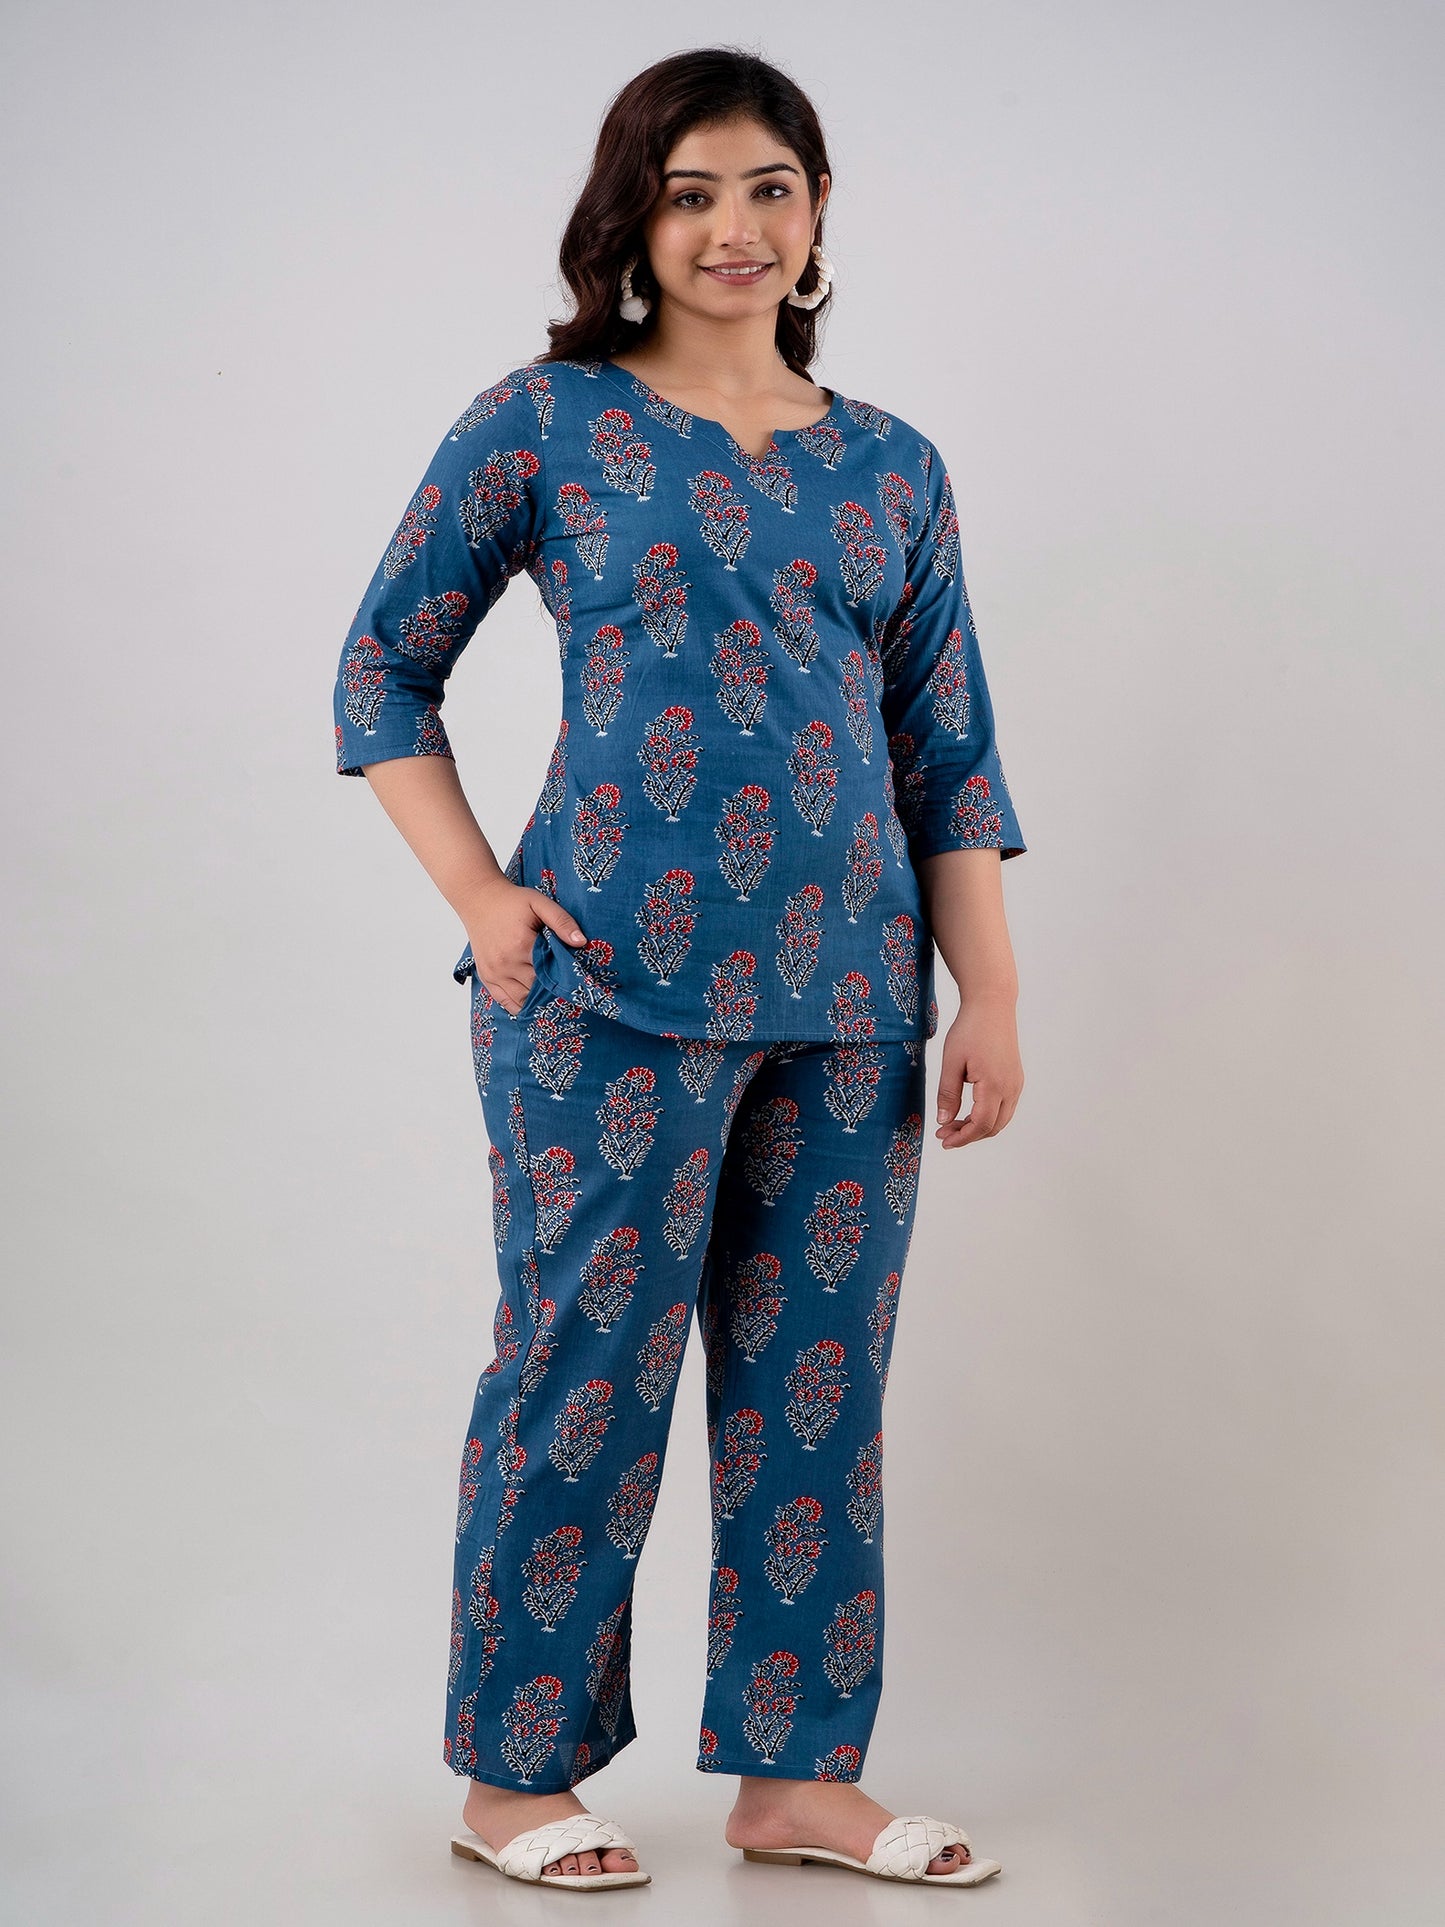 Blue Floral Printed Cotton Top and Pant Co-Ord Nightsuit Set